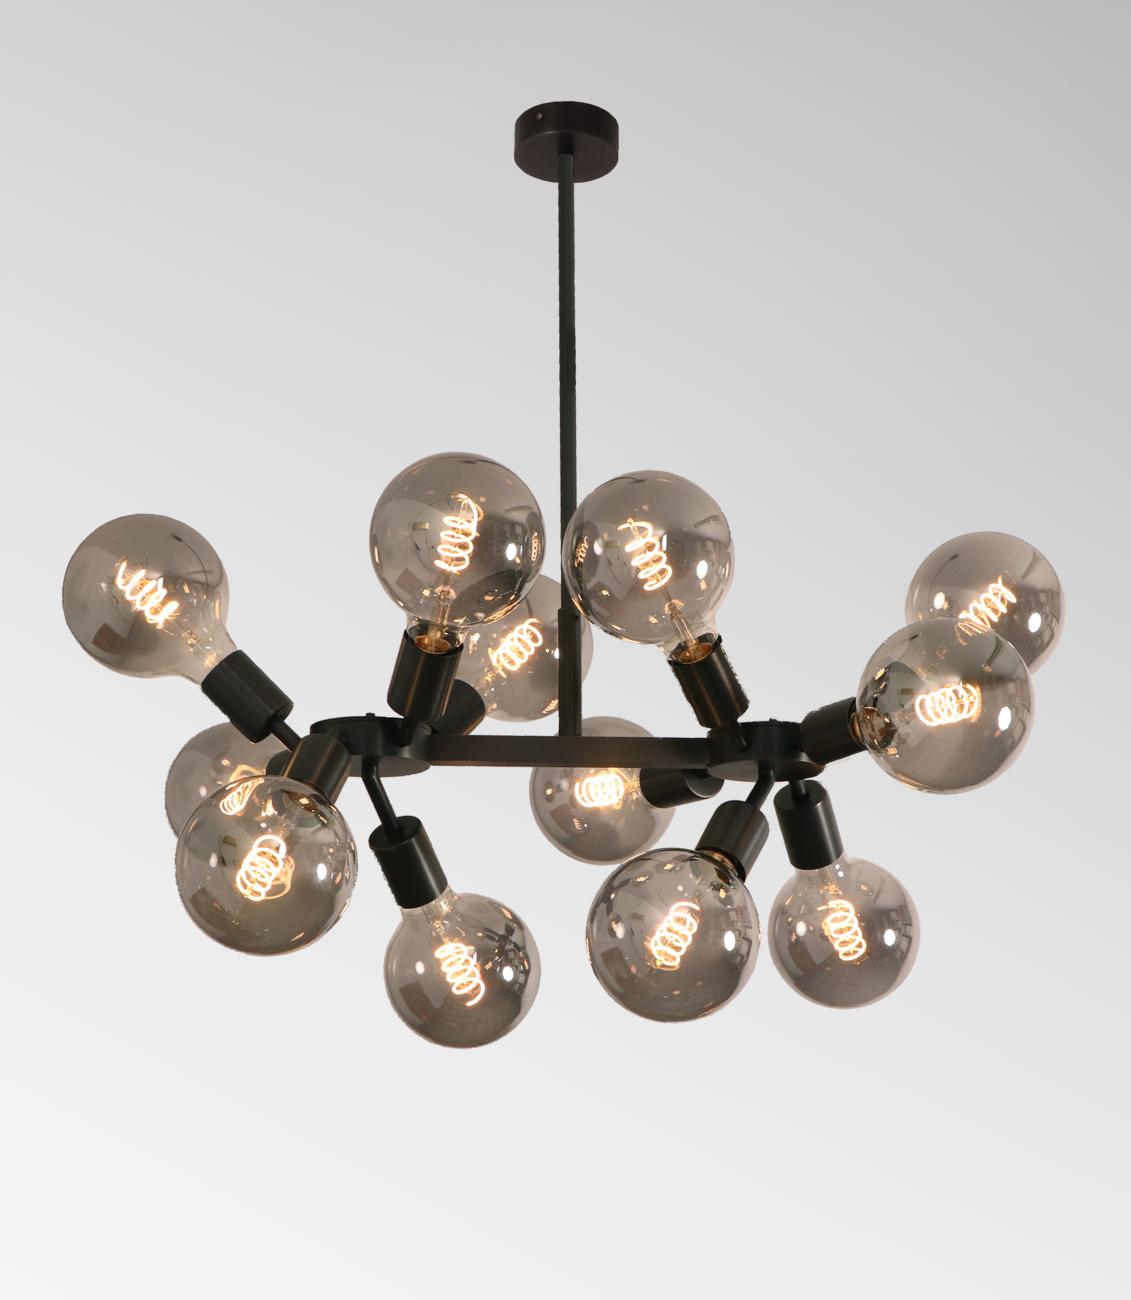 New products | Davidts Lighting